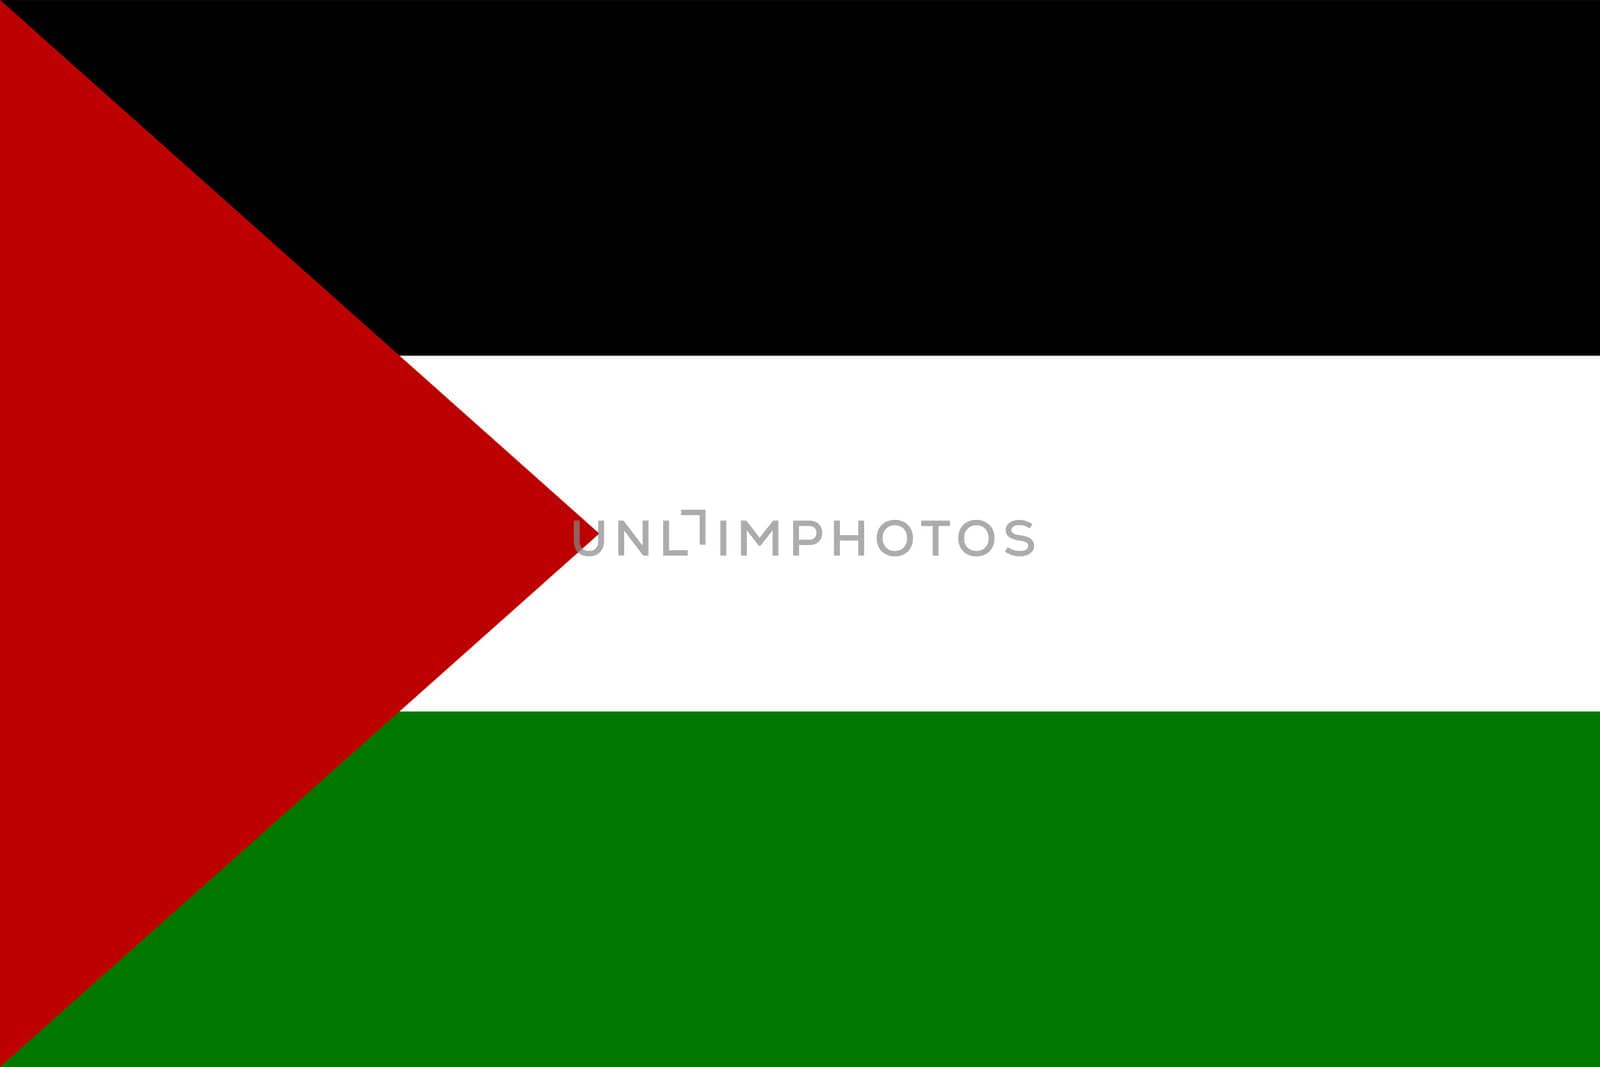 Flag of Palestine by peromarketing